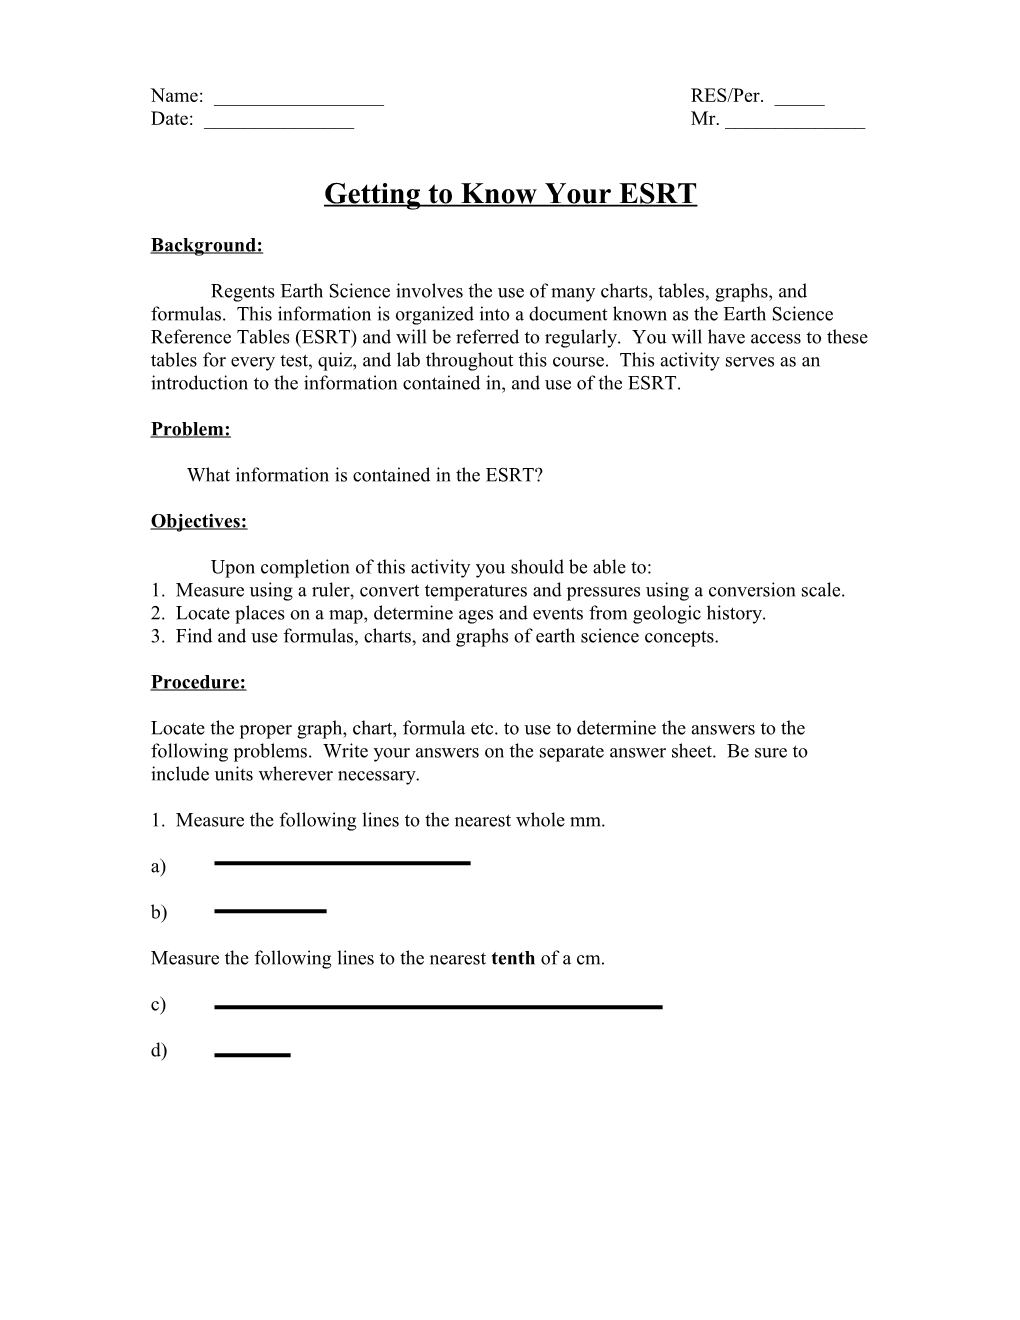 Getting to Know Your ESRT